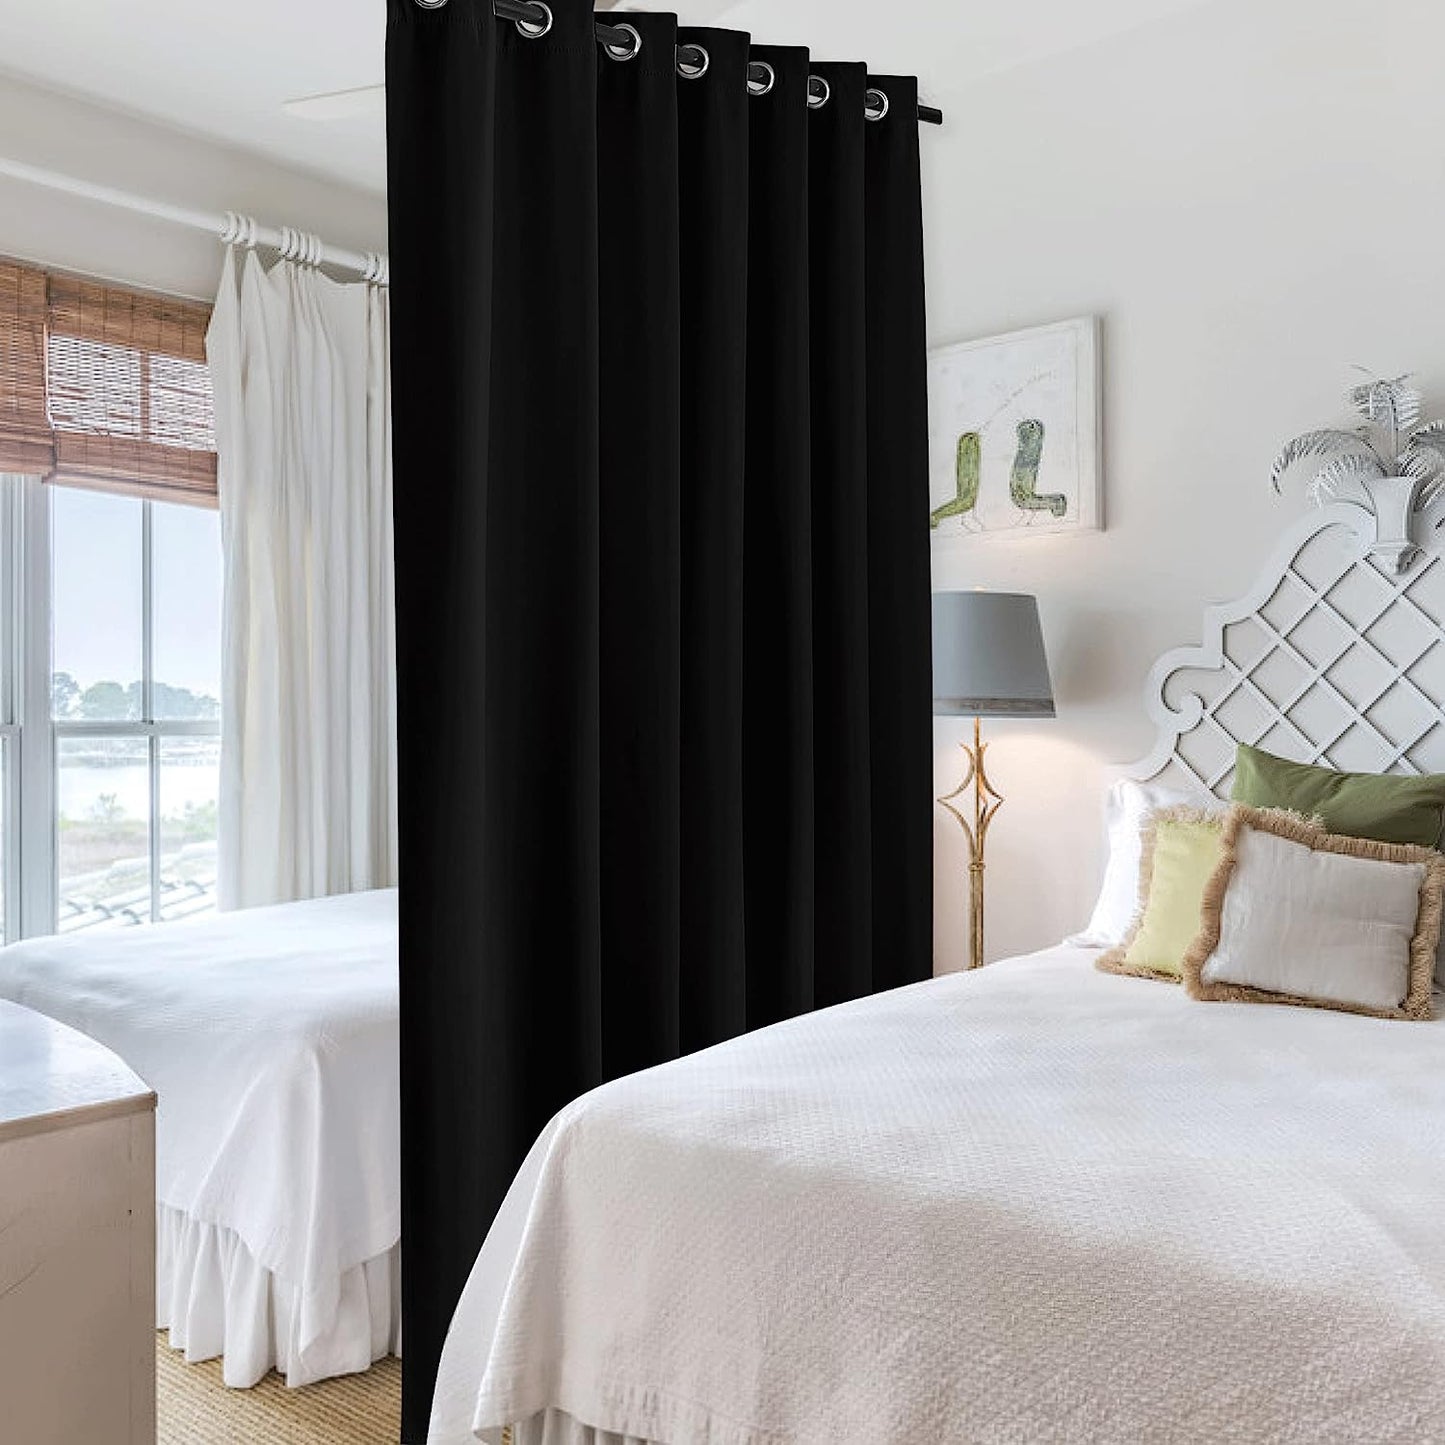 RYB HOME Blackout Thermal Insulated Blind Curtains, Noise Reduce Barrier for Nursery, Portable Curtain for Sliding Glass Door/Storage/Space Room Divider, 7 Ft Tall X 8.3 Ft Wide, Black, 1 Panel  RYB HOME   